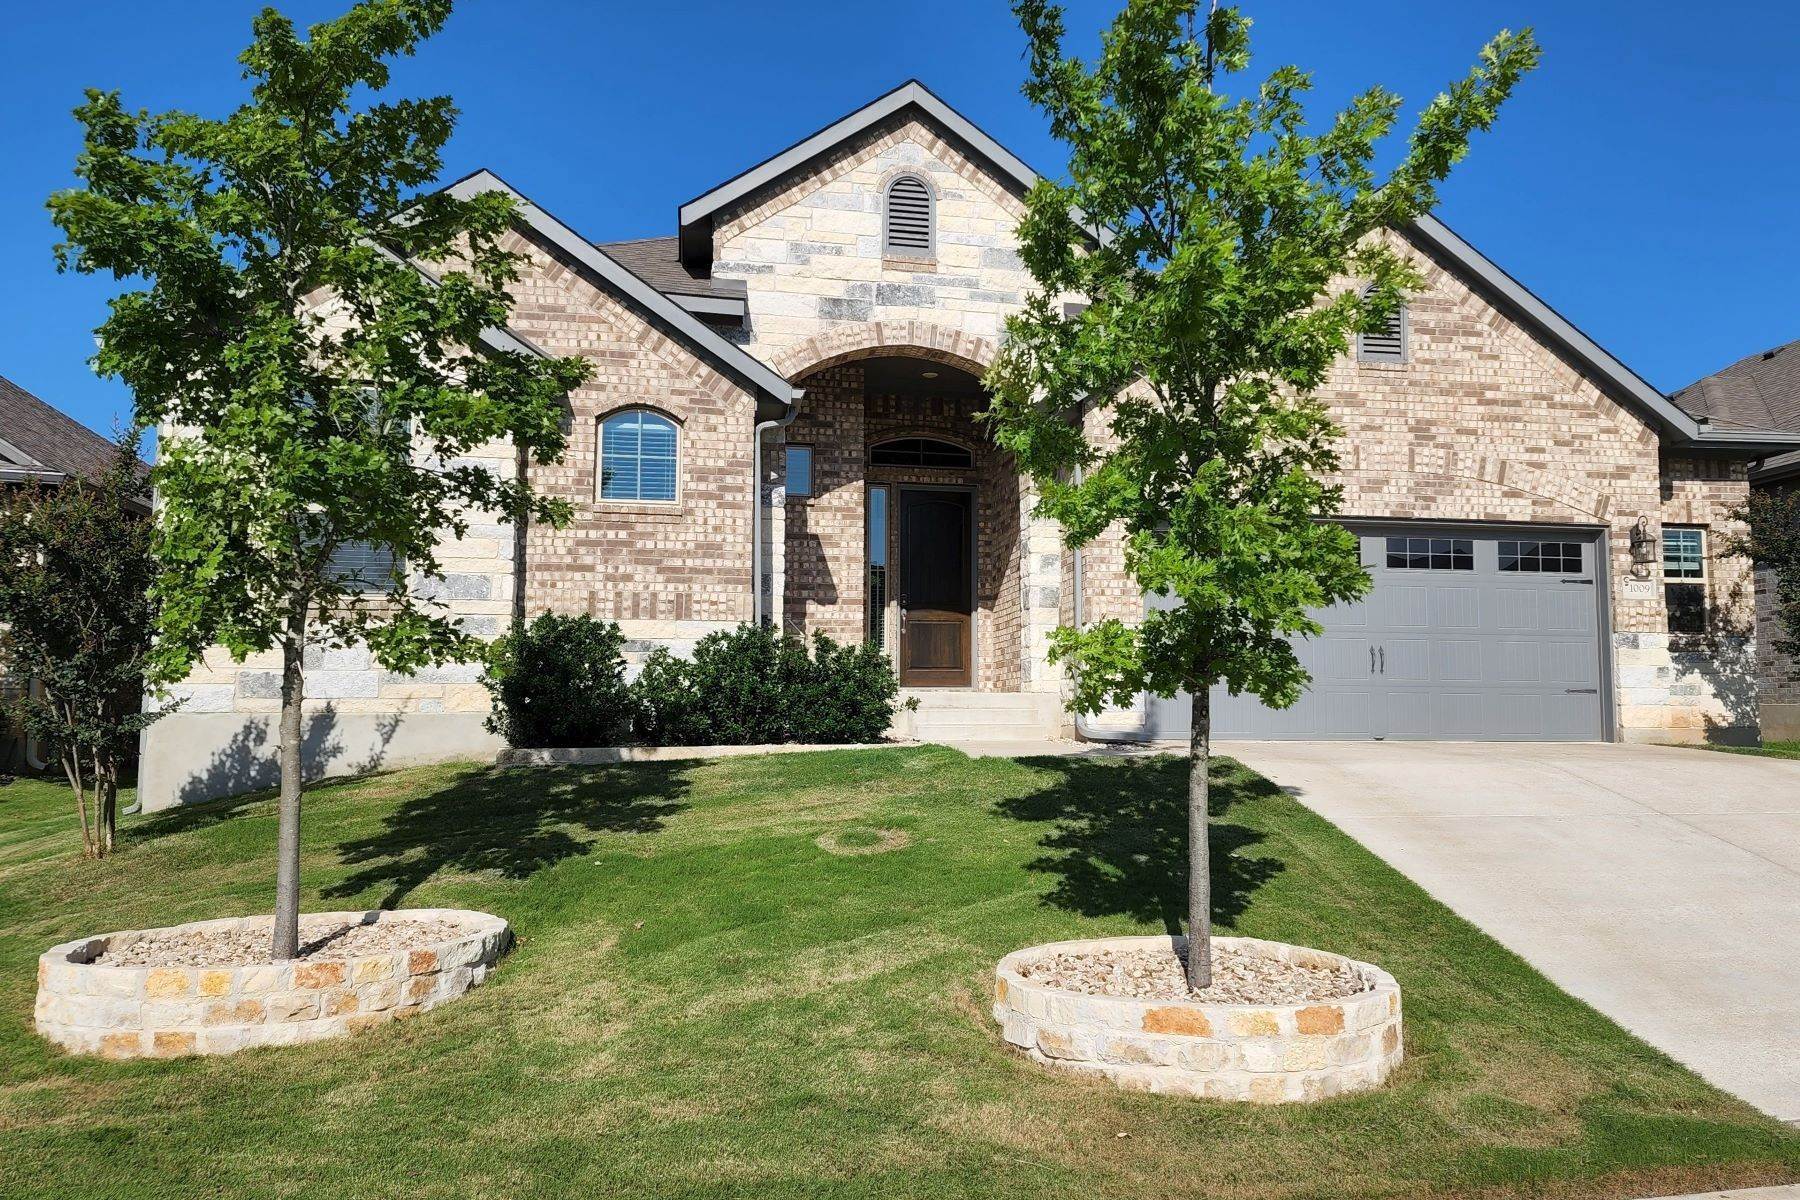 Single Family Homes for Sale at Like-New Thoughtfully Designed Home Ensures That Every Room is Spacious 1009 Partida Trail Leander, Texas 78641 United States